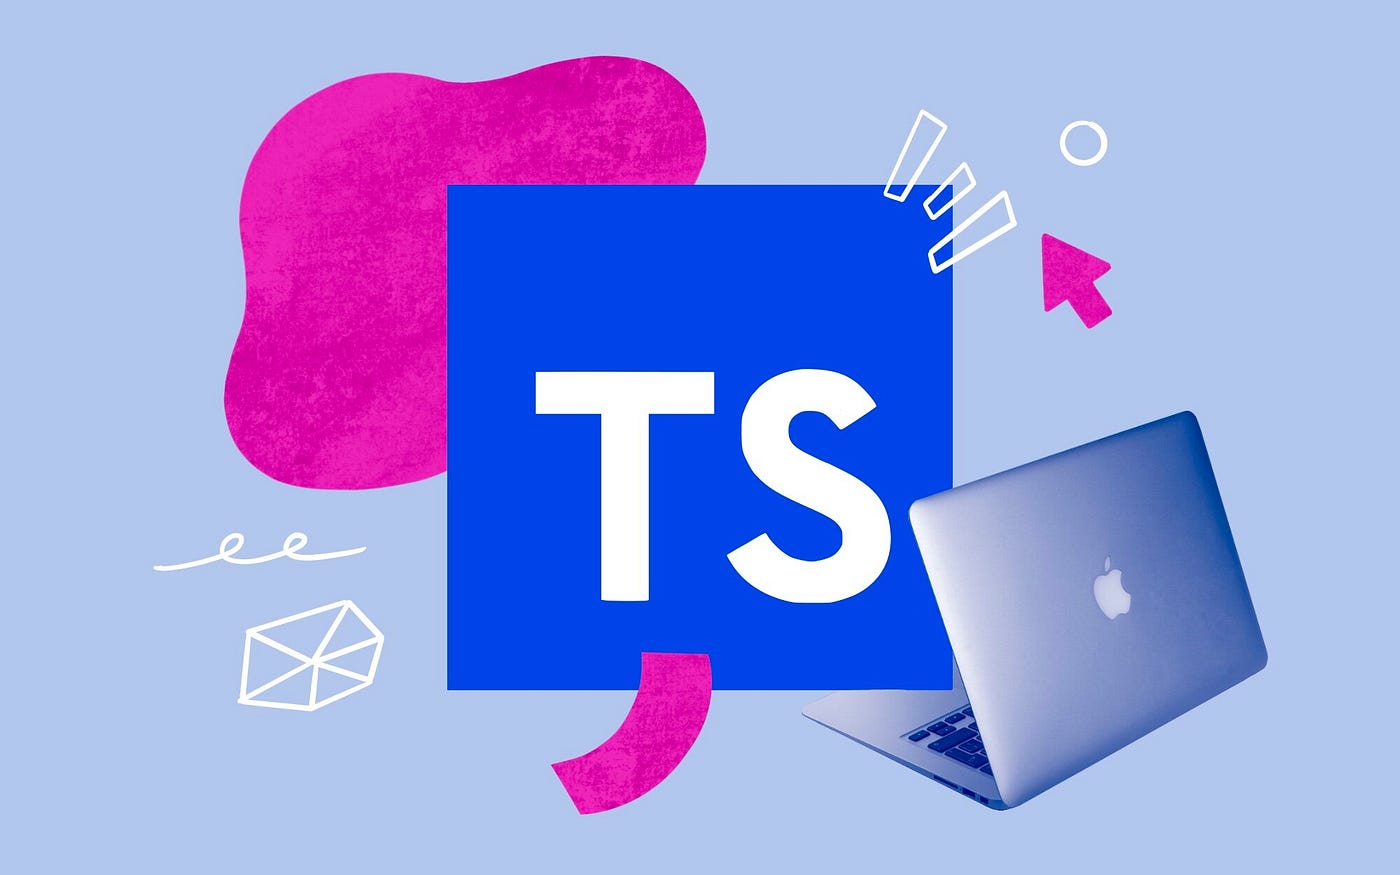 All You Need to Know About TypeScript Types - CopyCat Blog